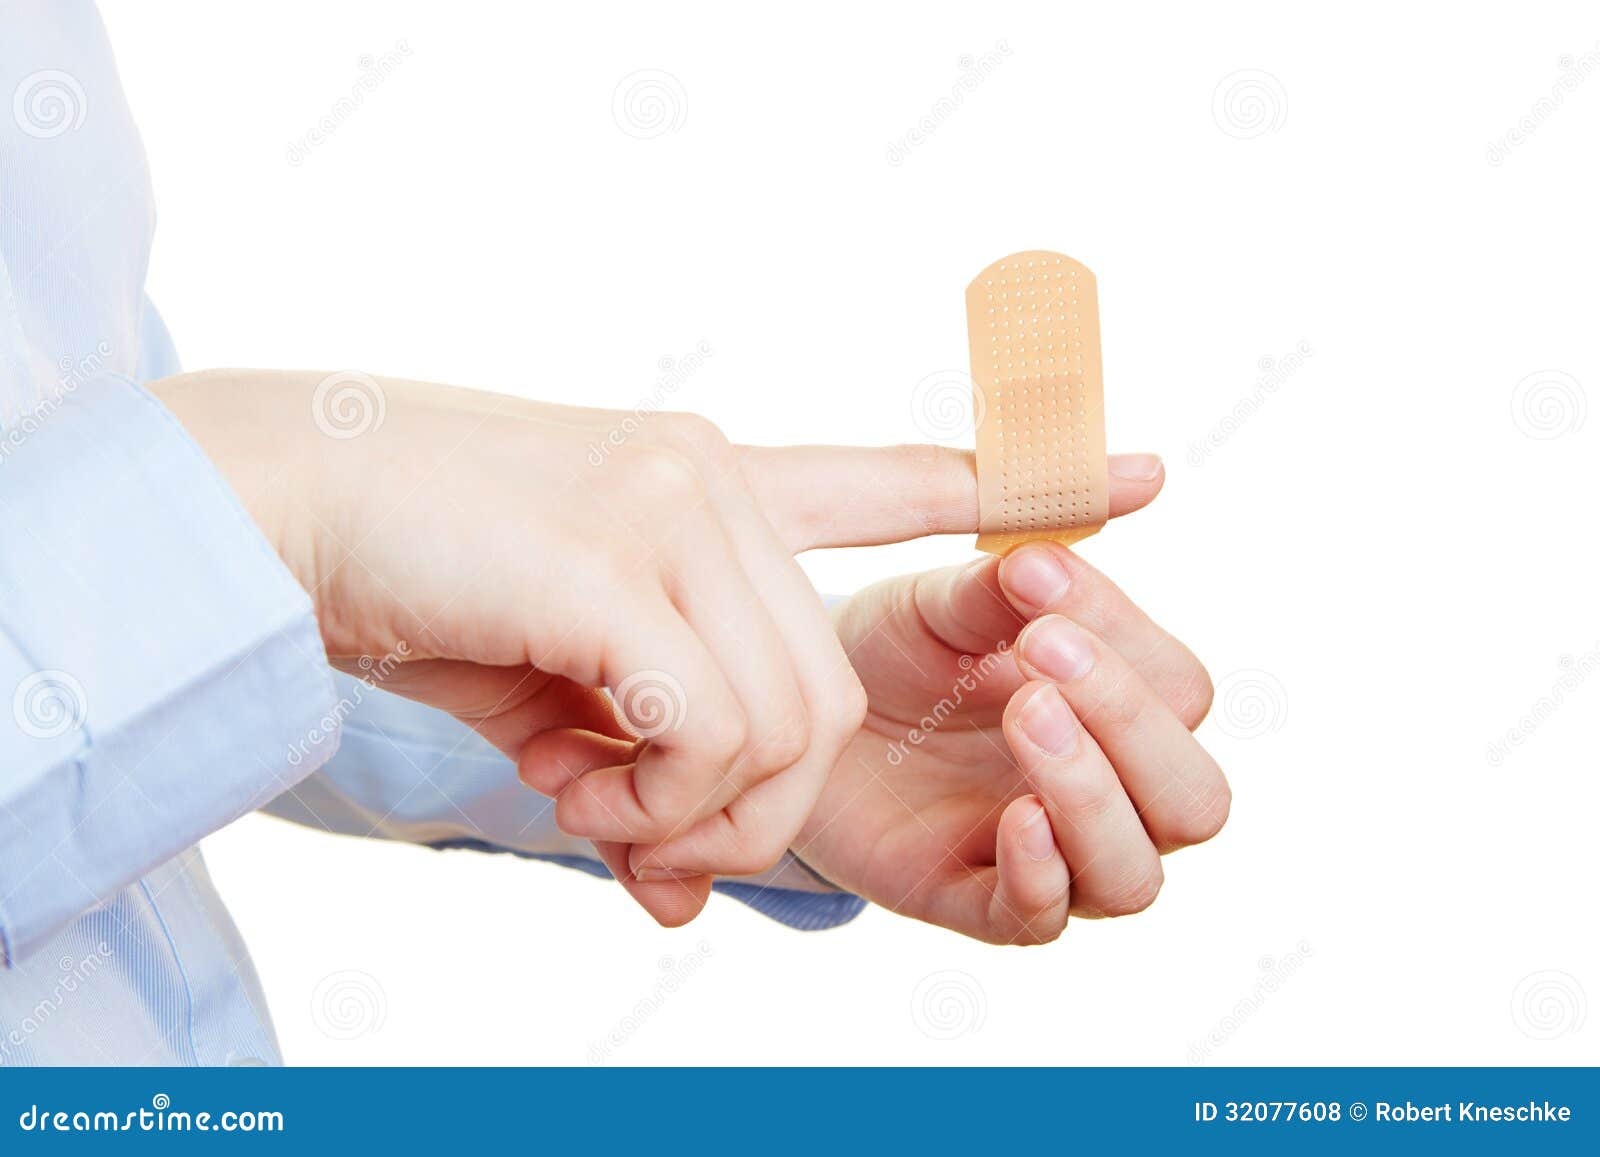 Injured Finger Getting Band-aid Royalty Free Stock Photos - Image: 32077608